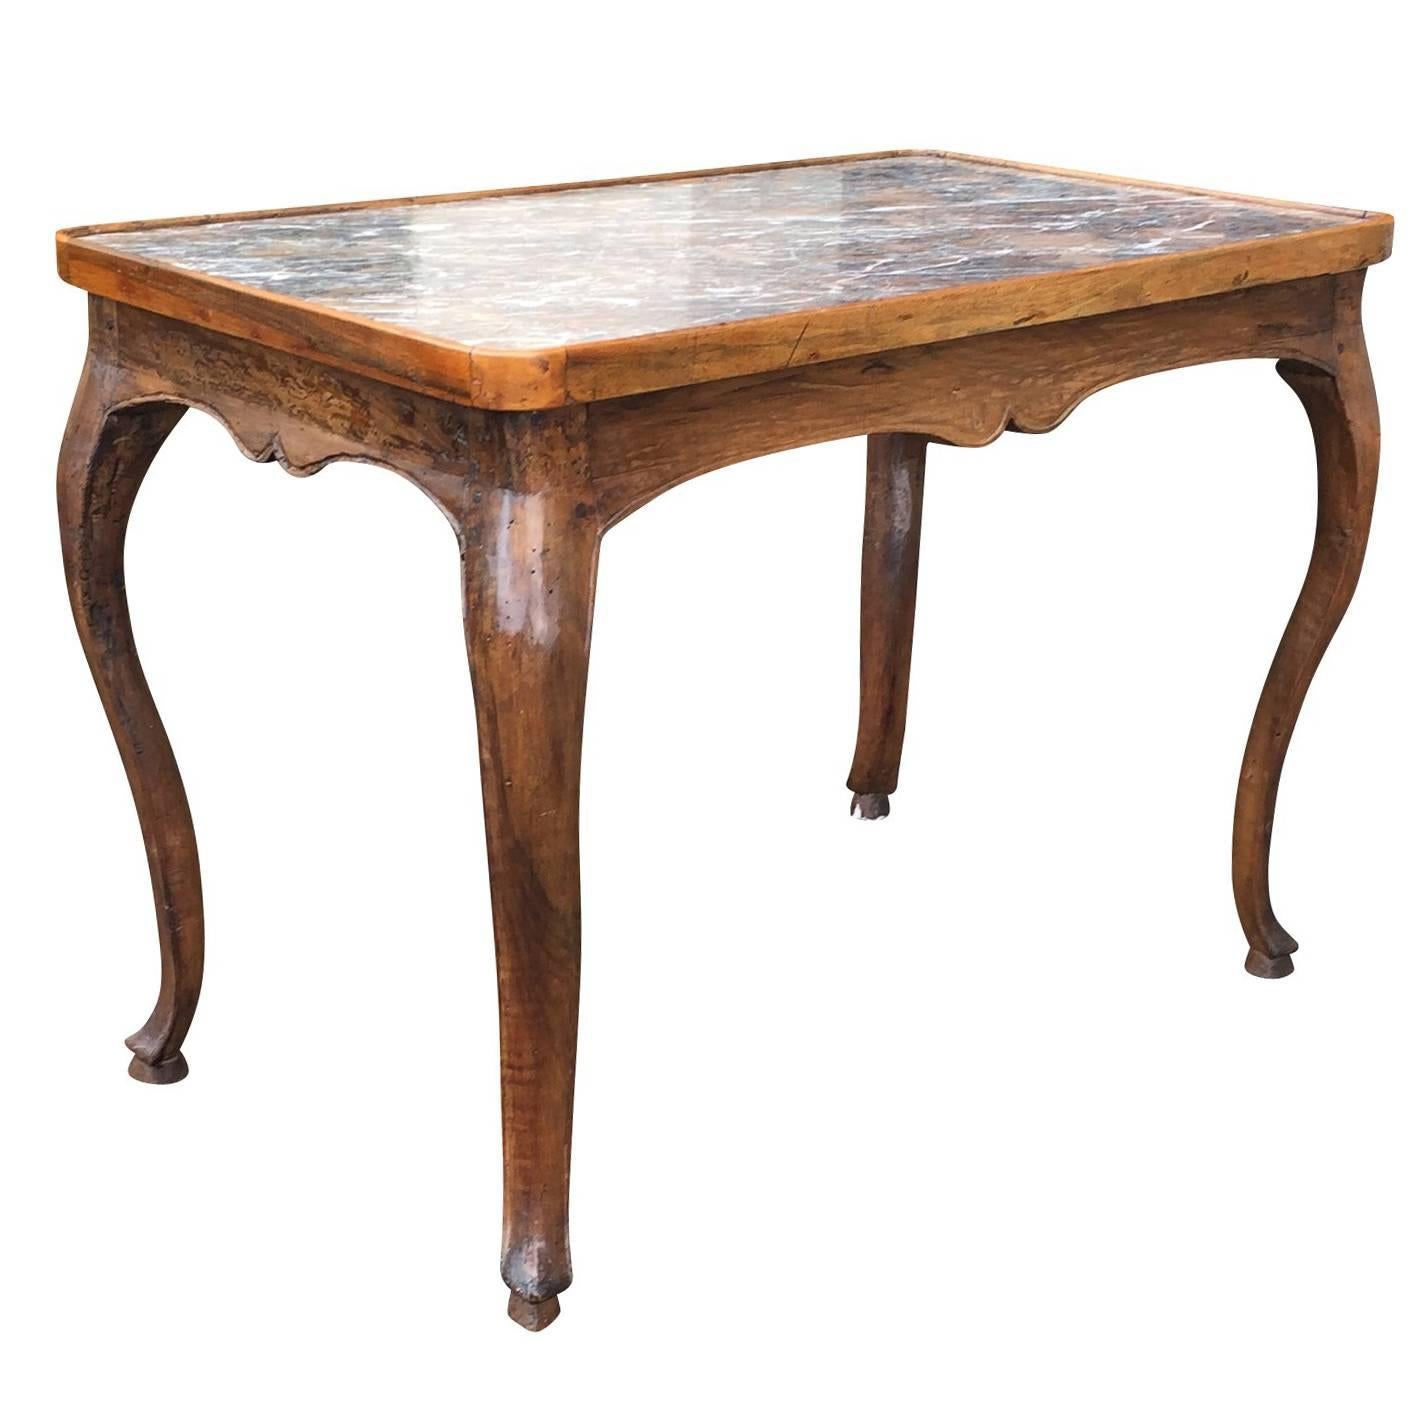 18th-19th Century French Louis XV Provincial Style Fruitwood Table